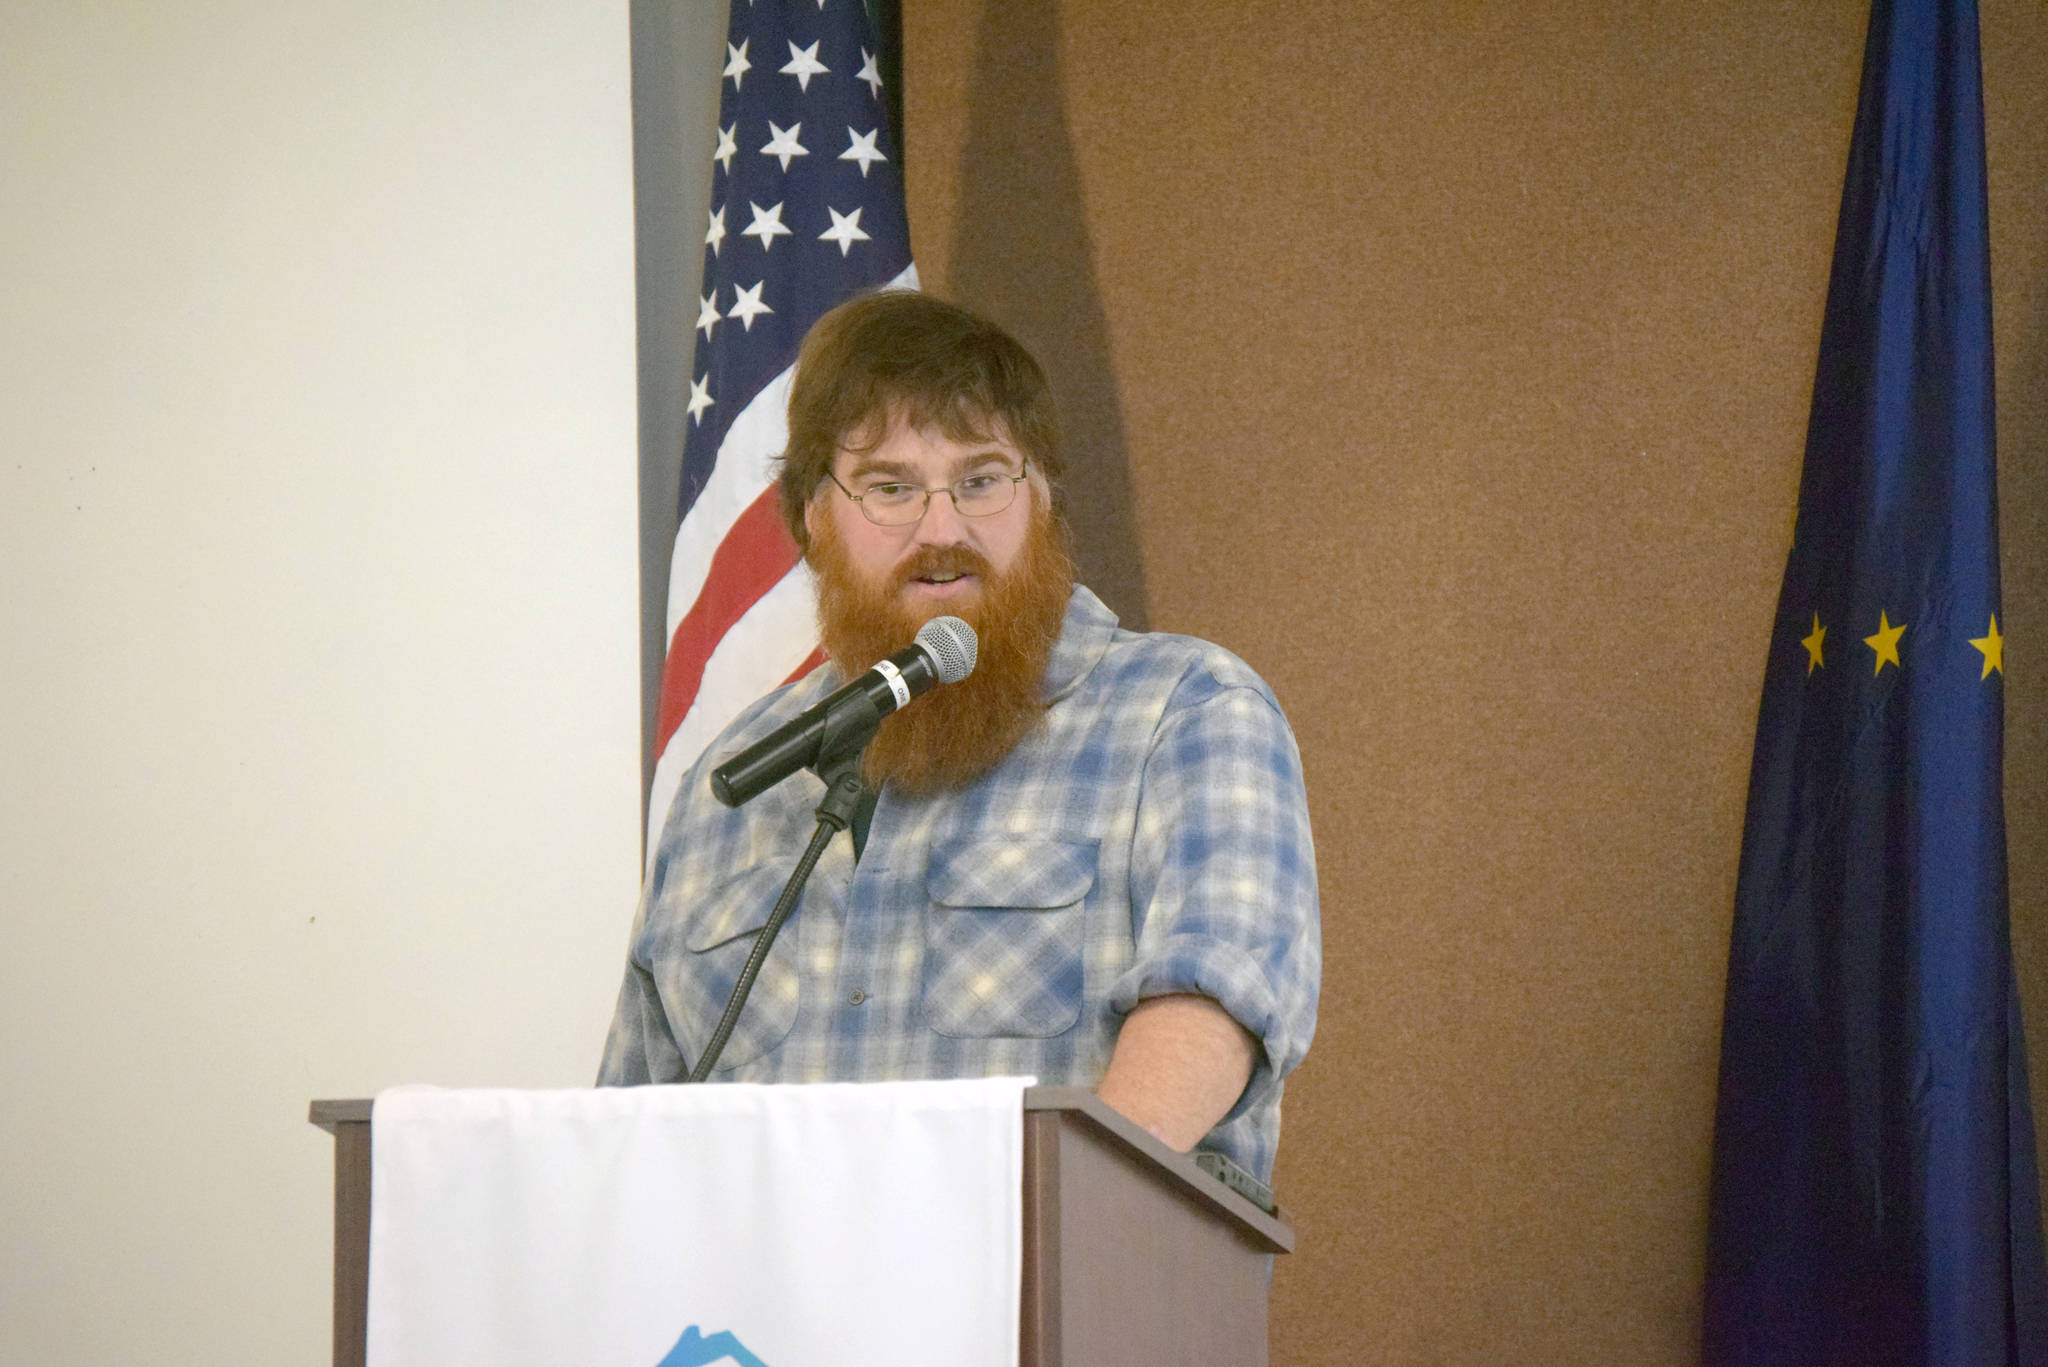 Drew Hamilton with the Friends of McNeil River gives a presentation to the Joint Kenai/Soldotna Chambers of Commerce in Kenai, Alaska on May 15, 2019. (Photo by Brian Mazurek/Peninsula Clarion)